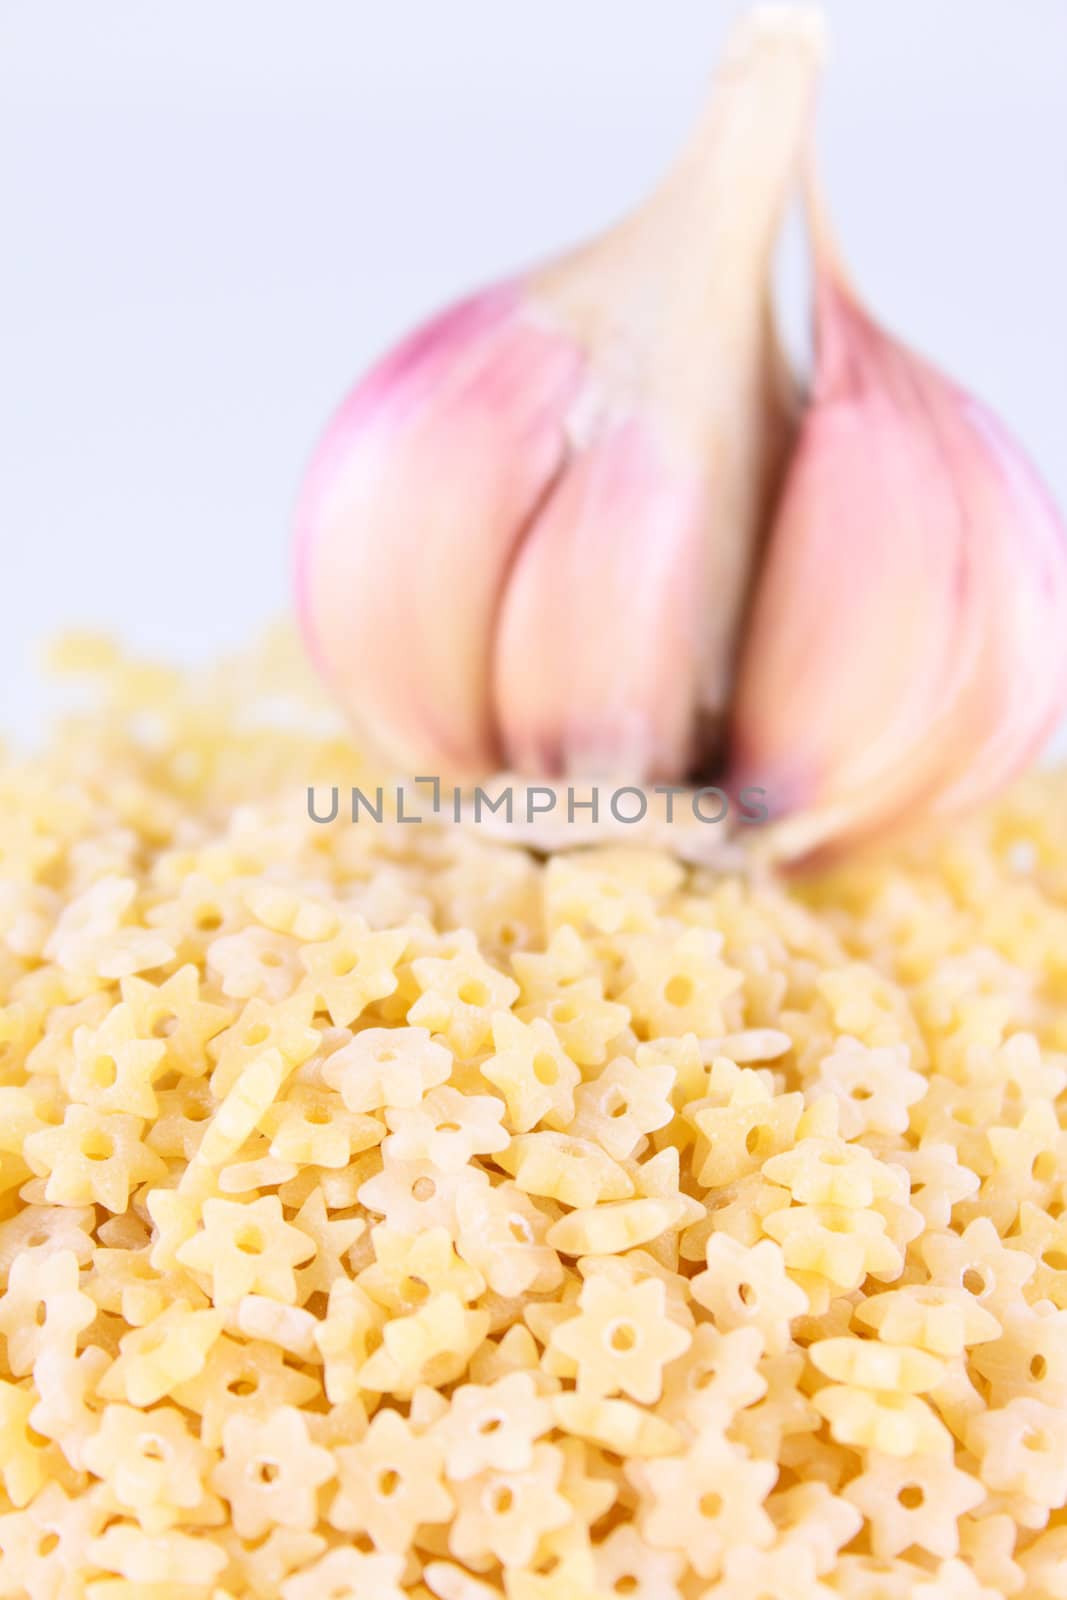 Asterisk pasta removed close up against garlic without isolation